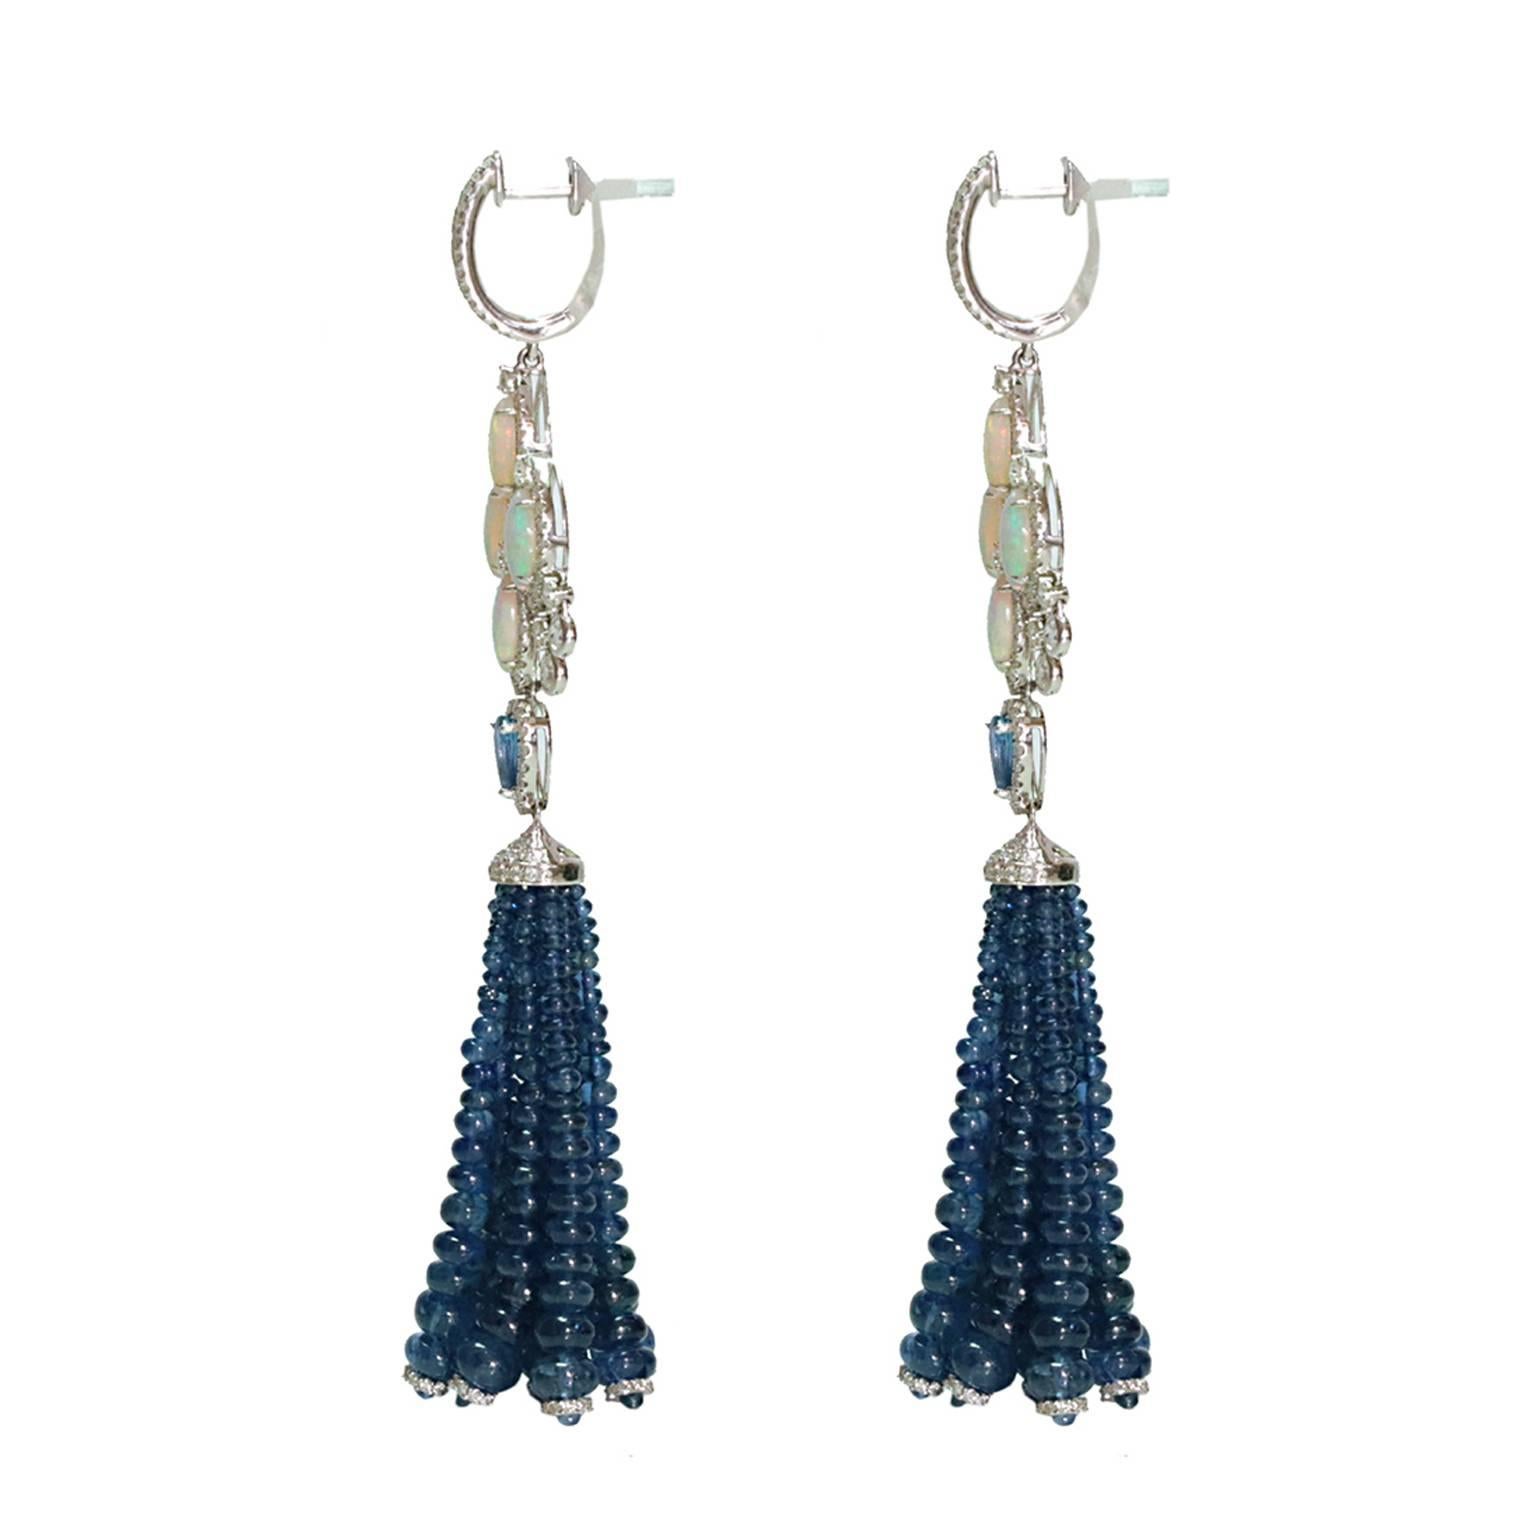 Tassels are one of the biggest trends this season and these Ethiopian Opal Blue Sapphire Diamond Tassel earrings will not disappoint!  Containing 3.01cts of Ethiopian Opal, 1.06cts of Blue Sapphire with 111cts of Blue Sapphire Beads for the tassel